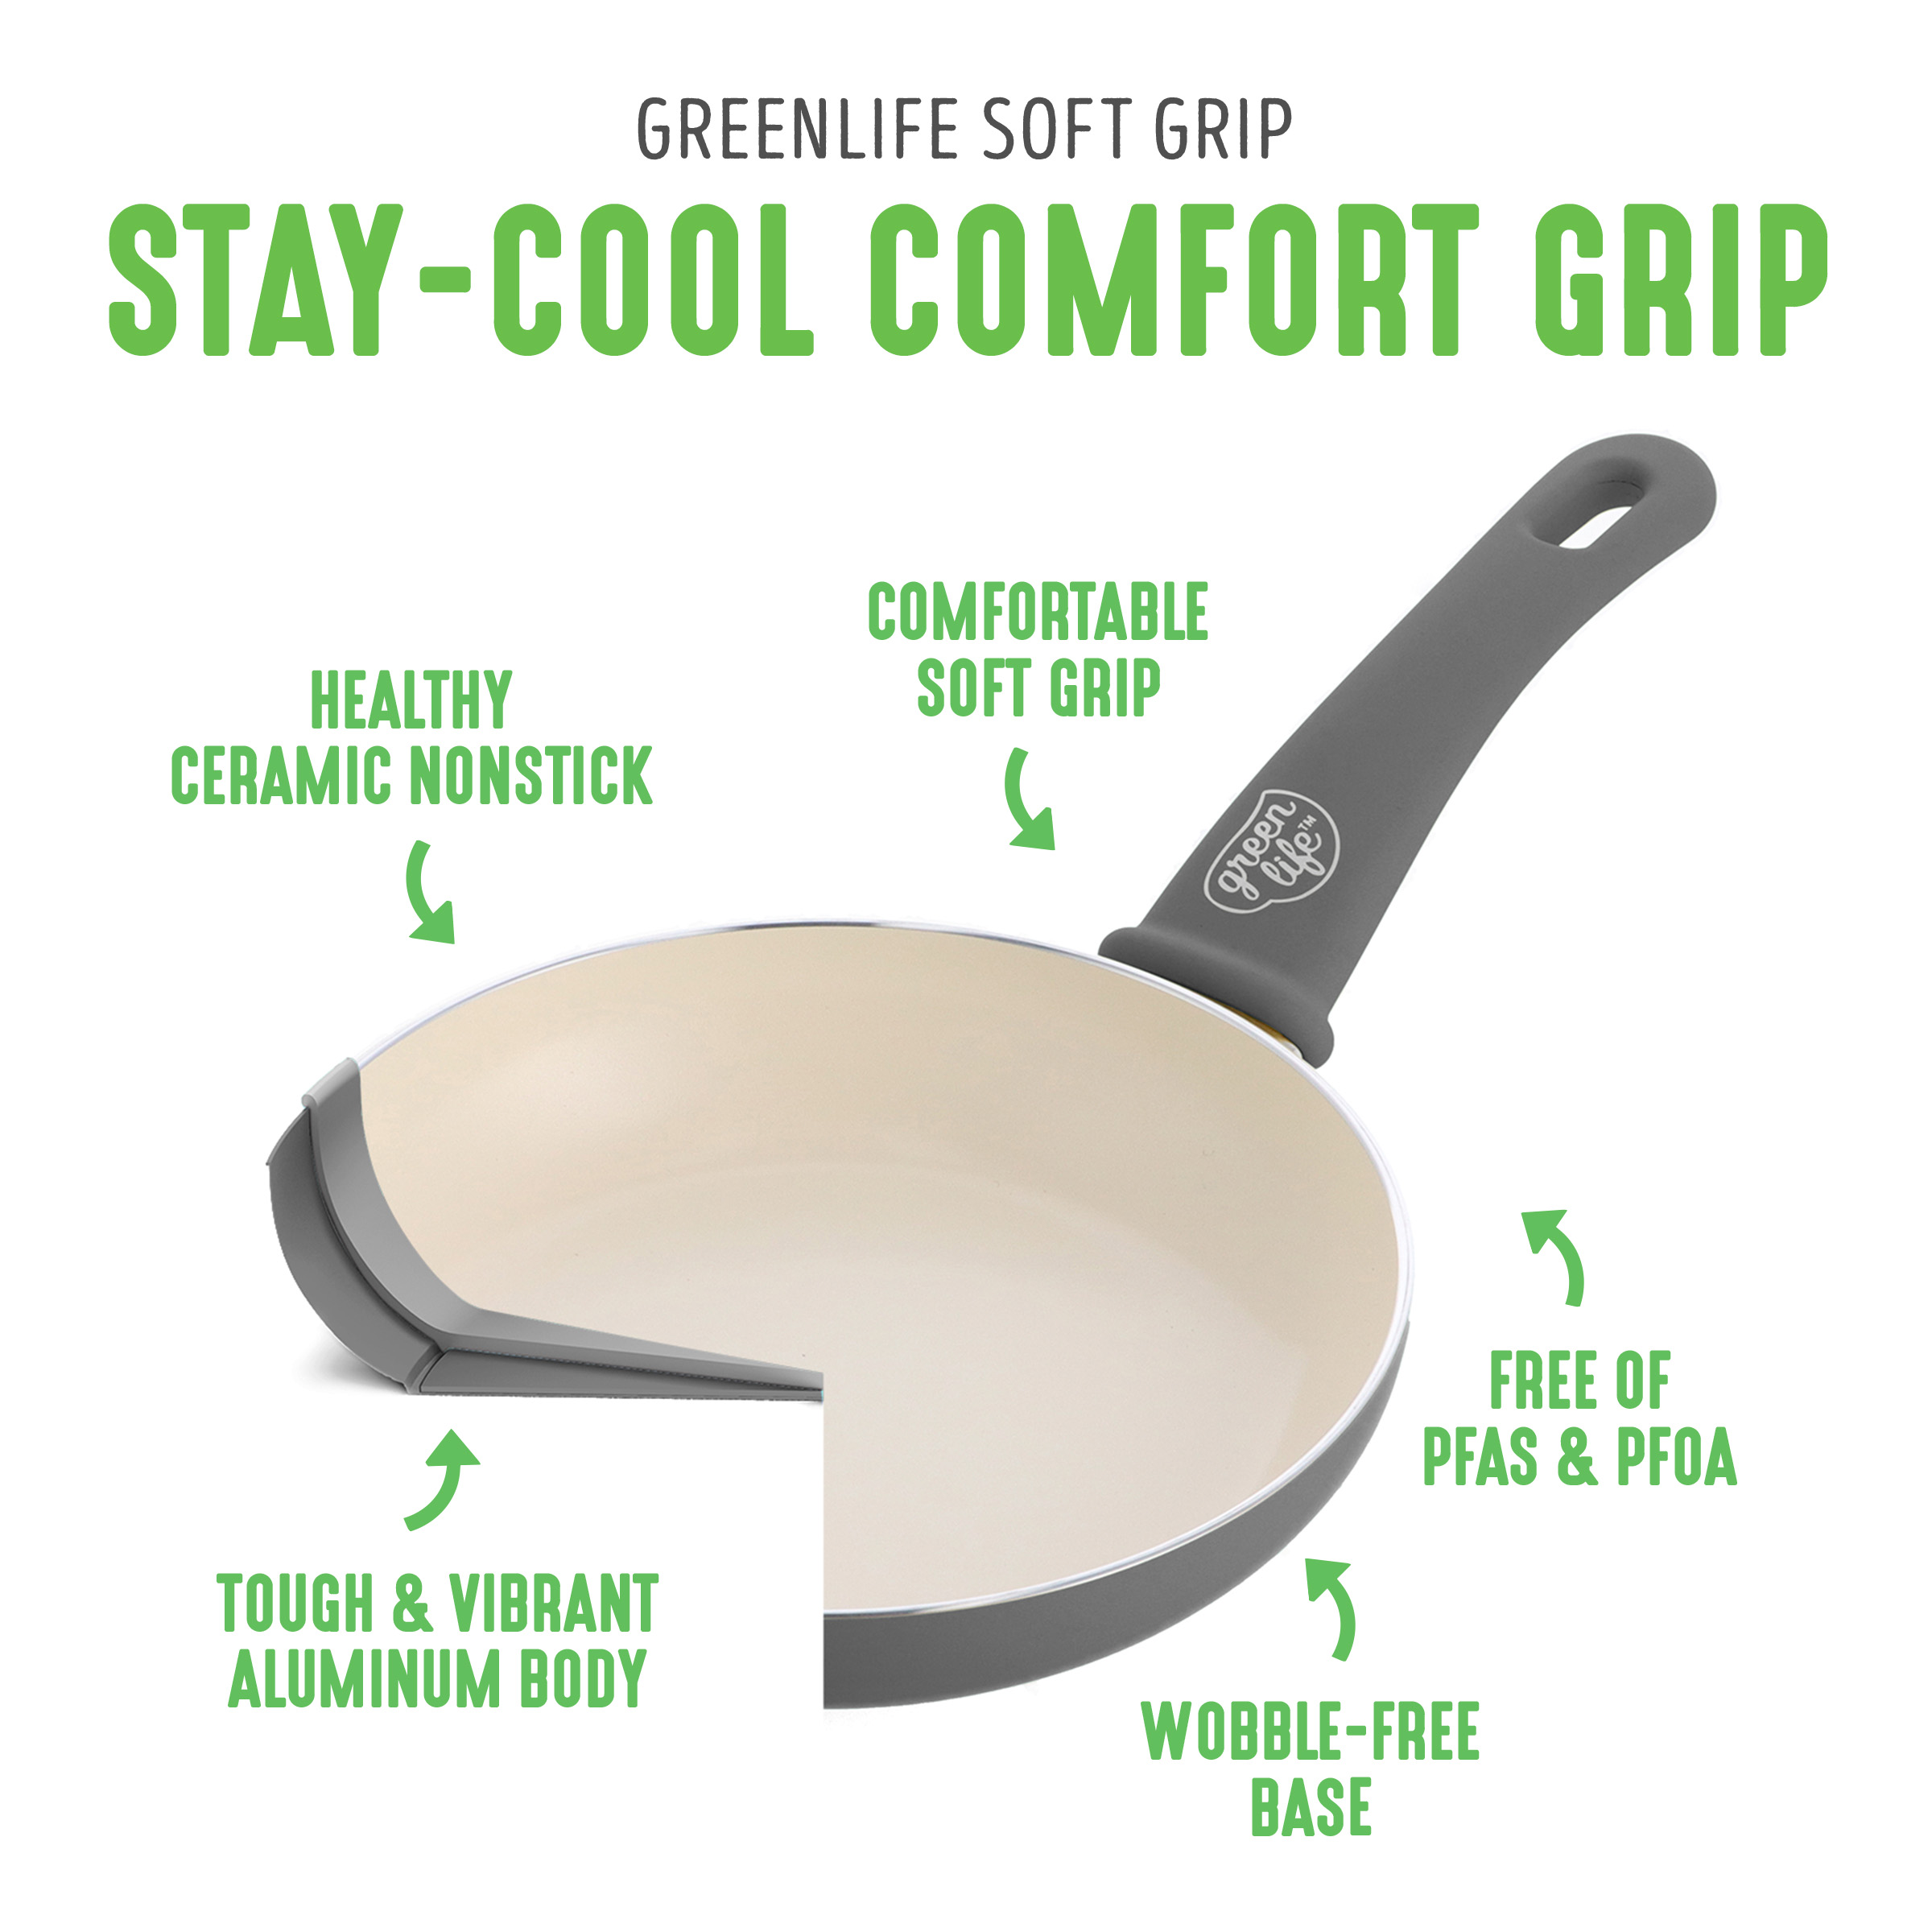 GreenLife 18-Piece Soft Grip Toxin-Free Healthy Ceramic Non-Stick Cookware Set, Gray, Dishwasher Safe - image 5 of 12